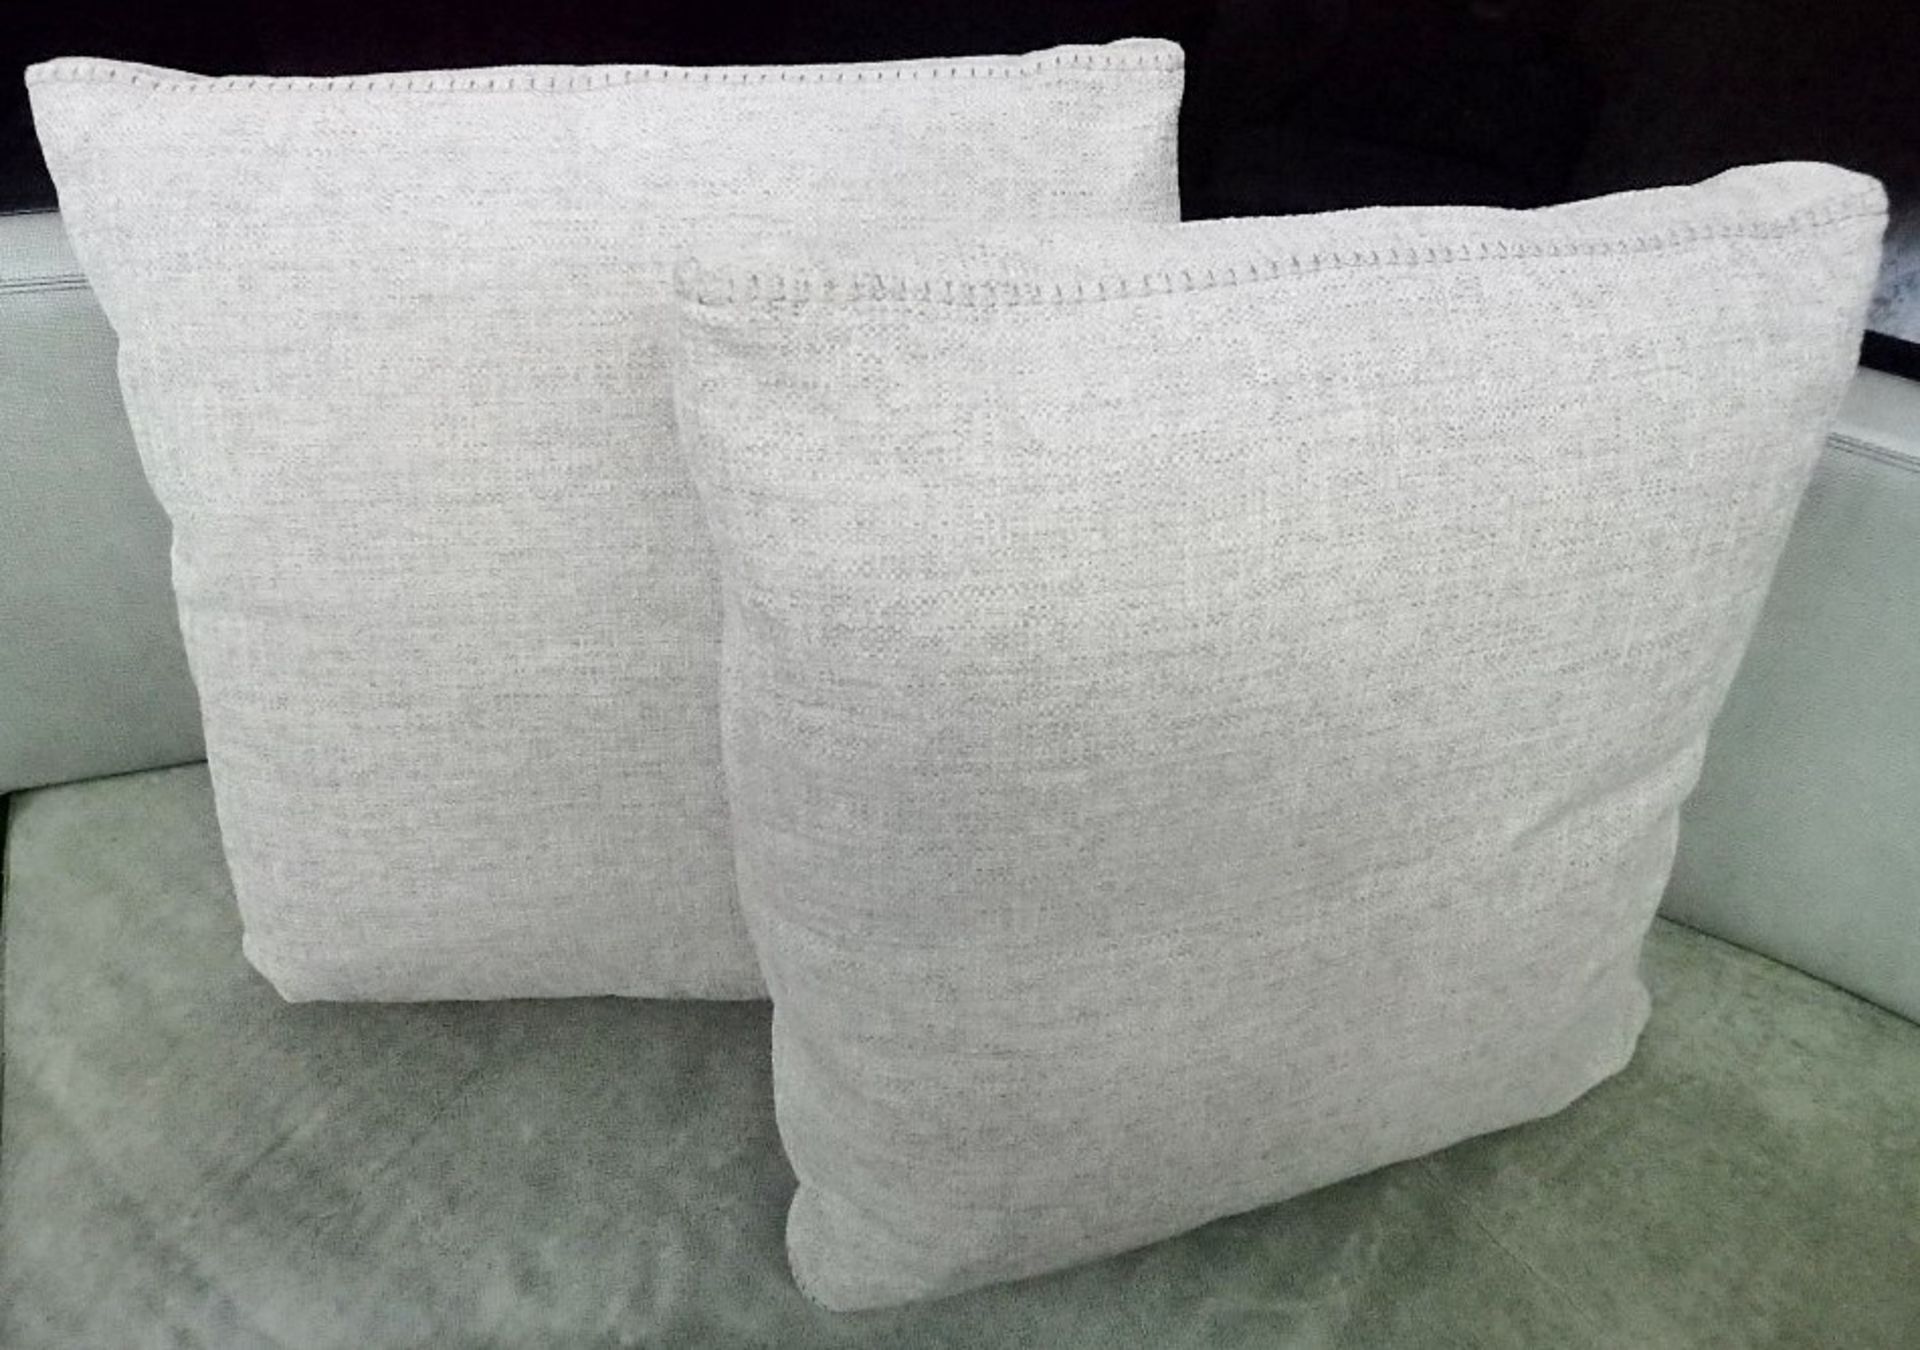 A Matching Pair Large Of Designer B&B Italia "RAY" Cushions - Ref: 4647387 A - Excellent - Image 4 of 4